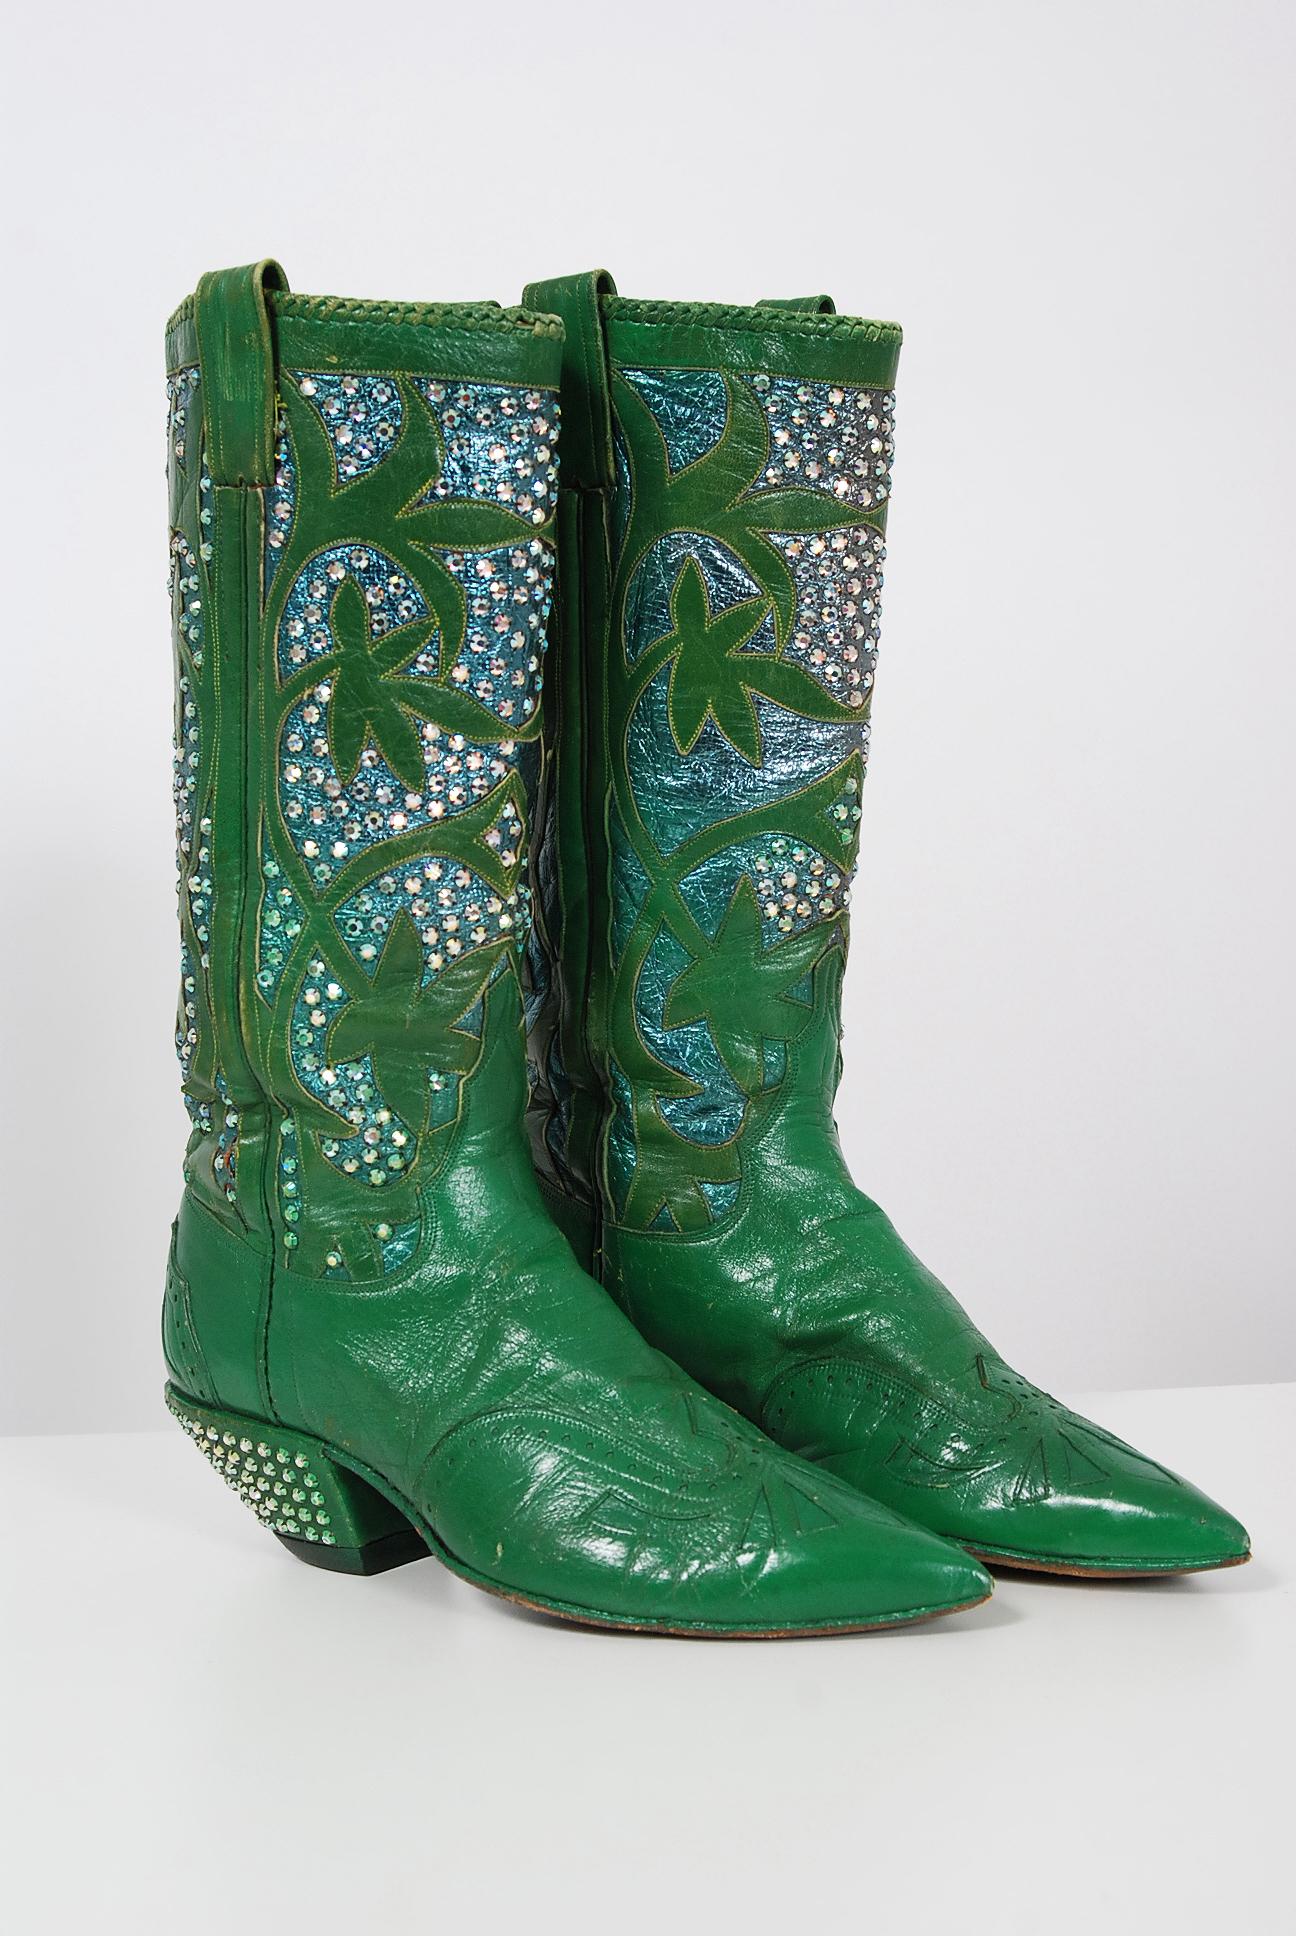 Stunning Nudie's Rodeo Tailor custom-made emerald green leather boots dating back to the early 1970's. Nudie Cohn was one of the great makers of Hollywood western-style garments. Nudie began making cowboy attire in 1940, doing orders for clients